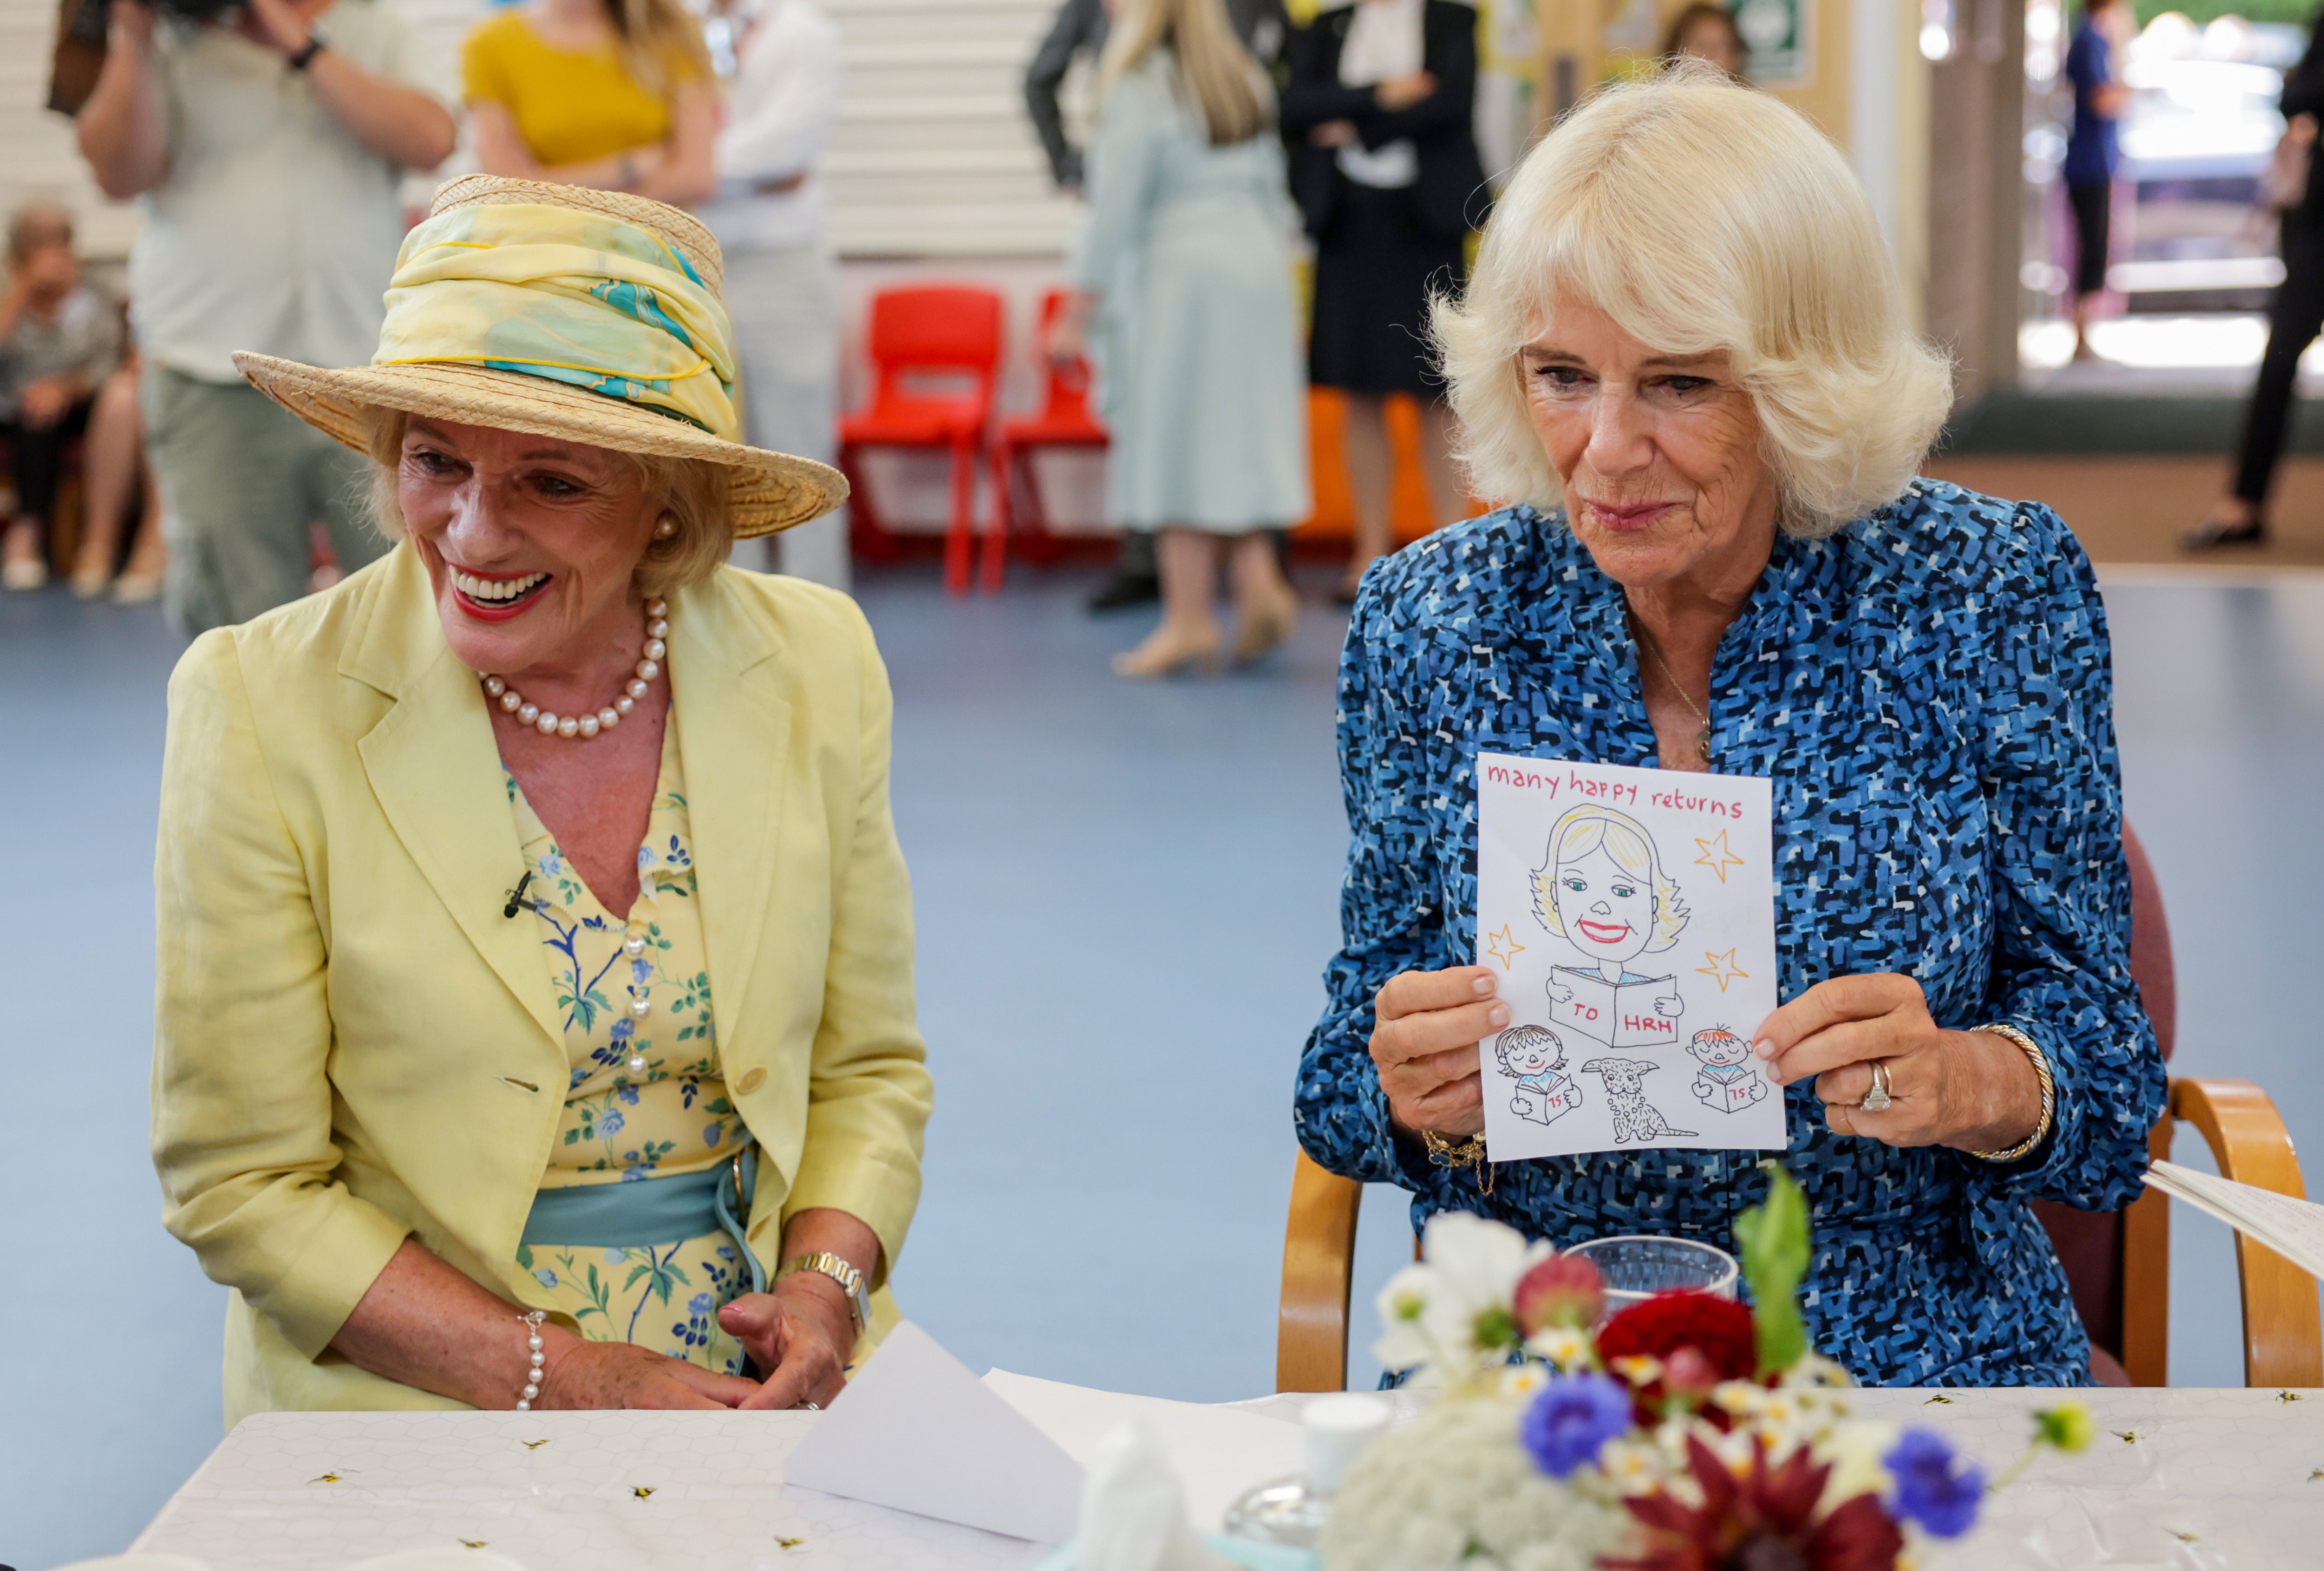 The Duchess of Cornwall with Dame Esther Rantzen during a visit to Charlestown School in St Austell (Chris Jackson/PA)